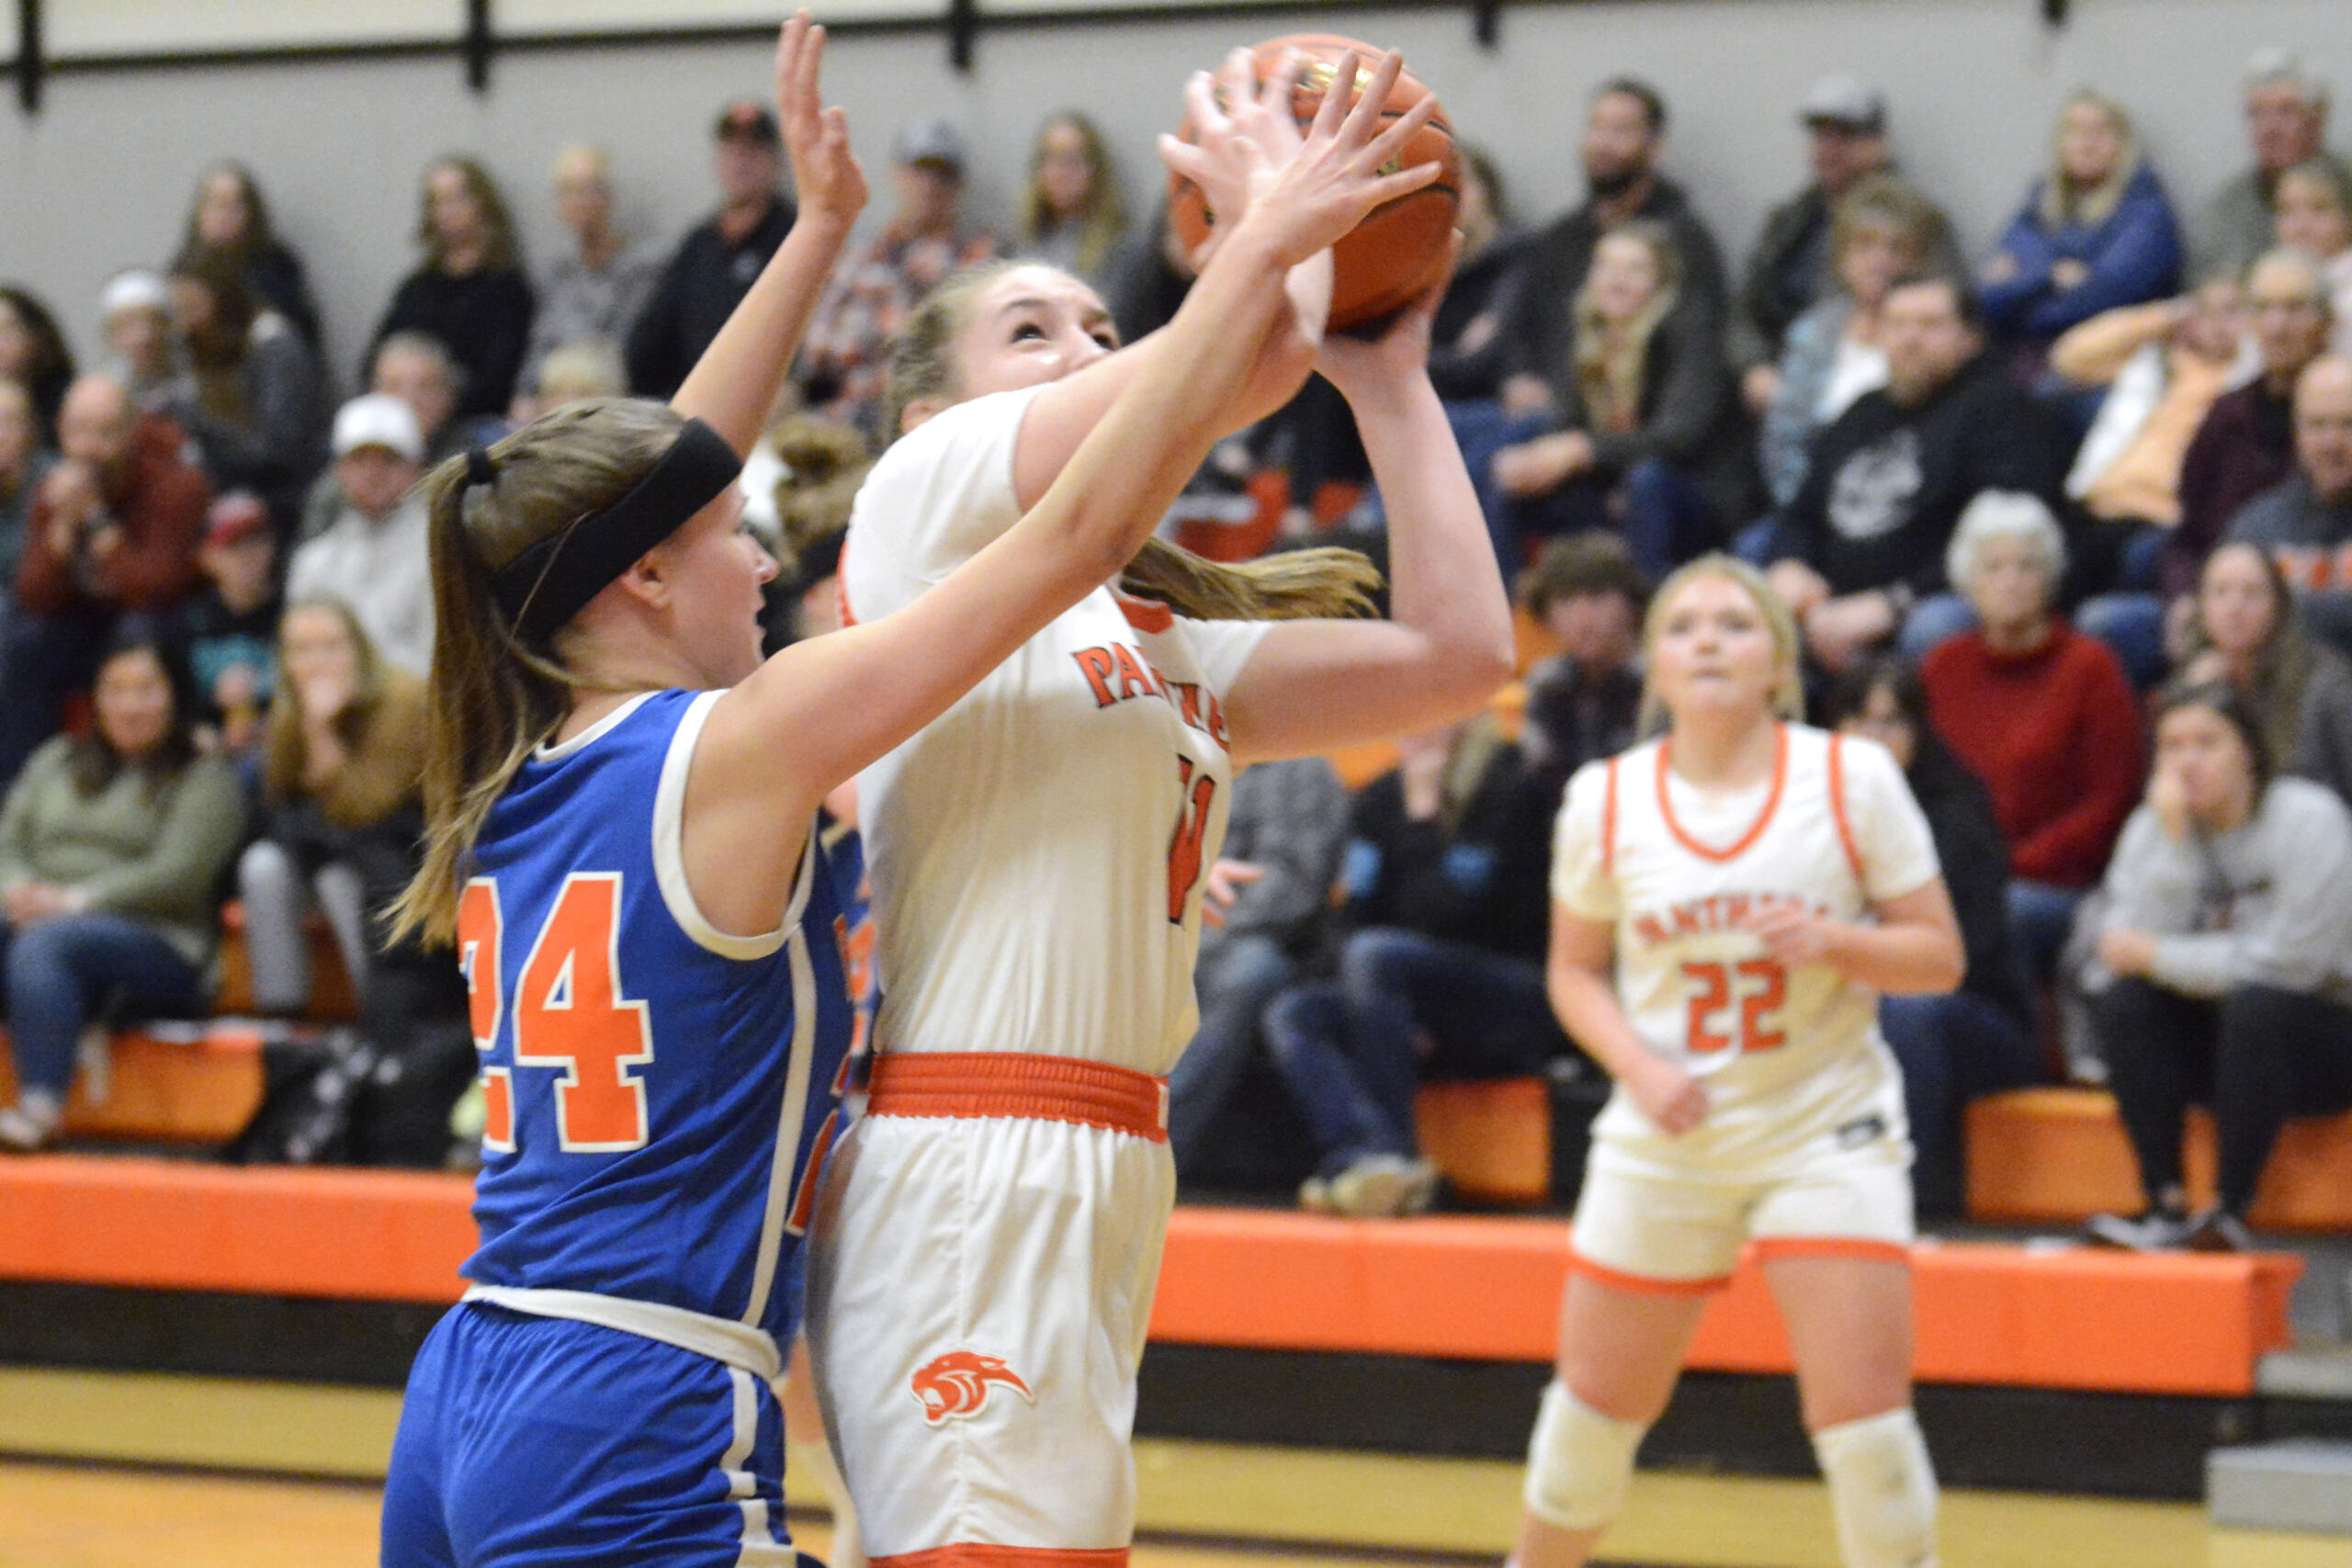 Washougal’s Hadley Jones, center, puts up a shot while being guarded by Ridgefield’s Morgan Goode, left, during a 2A GSHL girls basketball game on Wednesday, Dec. 14, 2022, at Washougal High School.